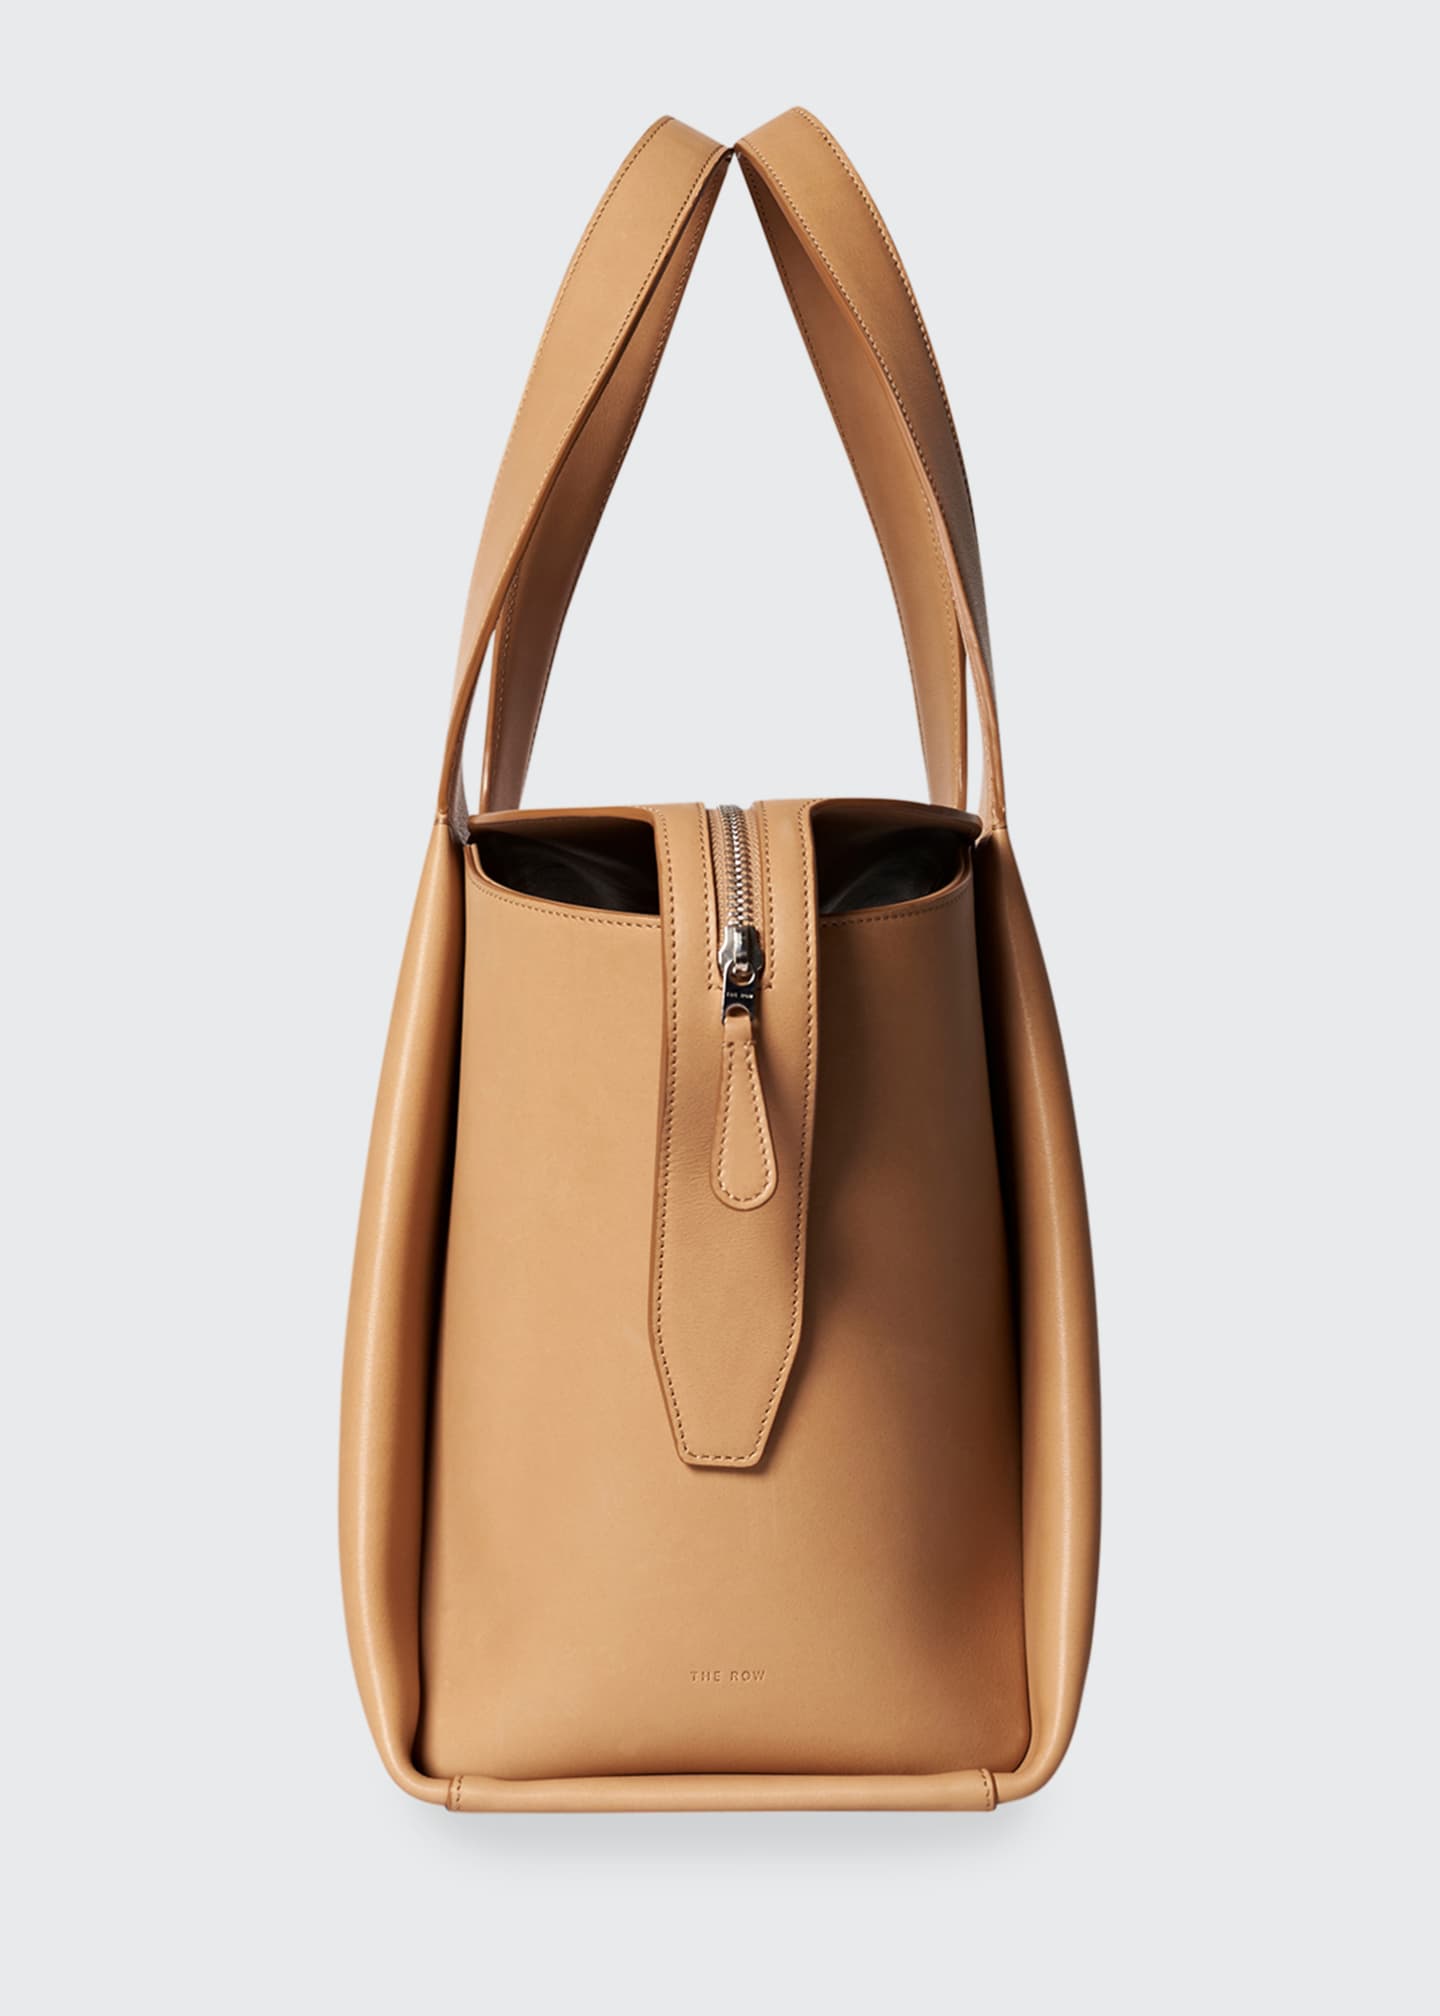 THE ROW Large TR1 Bag in Calfskin Leather - Bergdorf Goodman